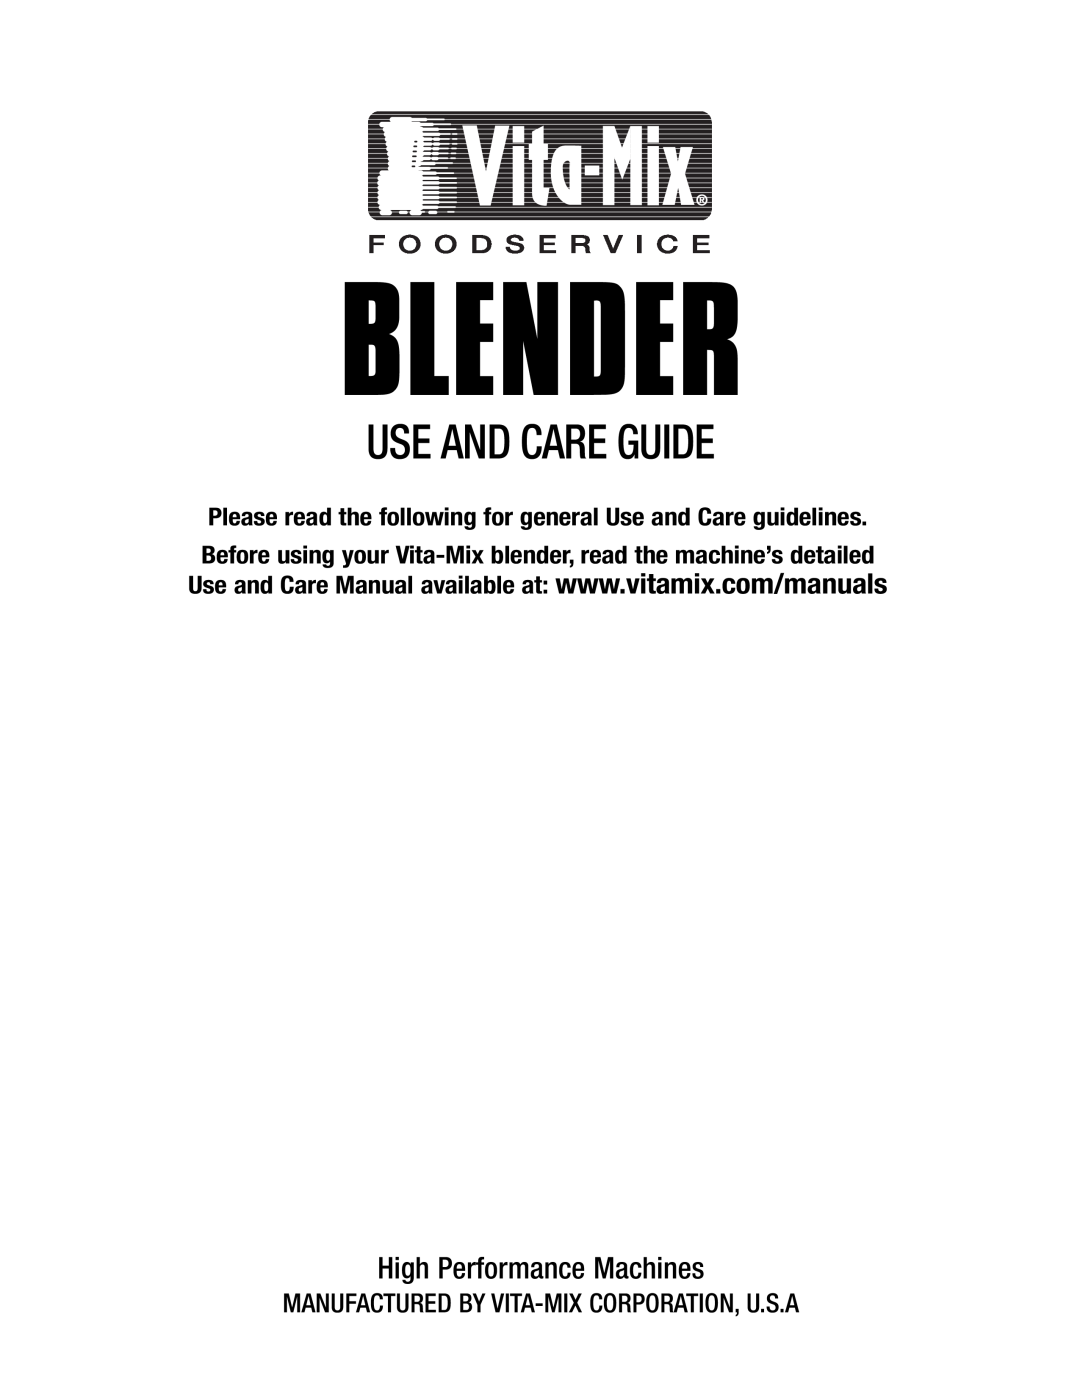 Vita-Mix 101807 manual Blender, Use And Care Guide, High Performance Machines, Manufactured By Vita-Mixcorporation, U.S.A 